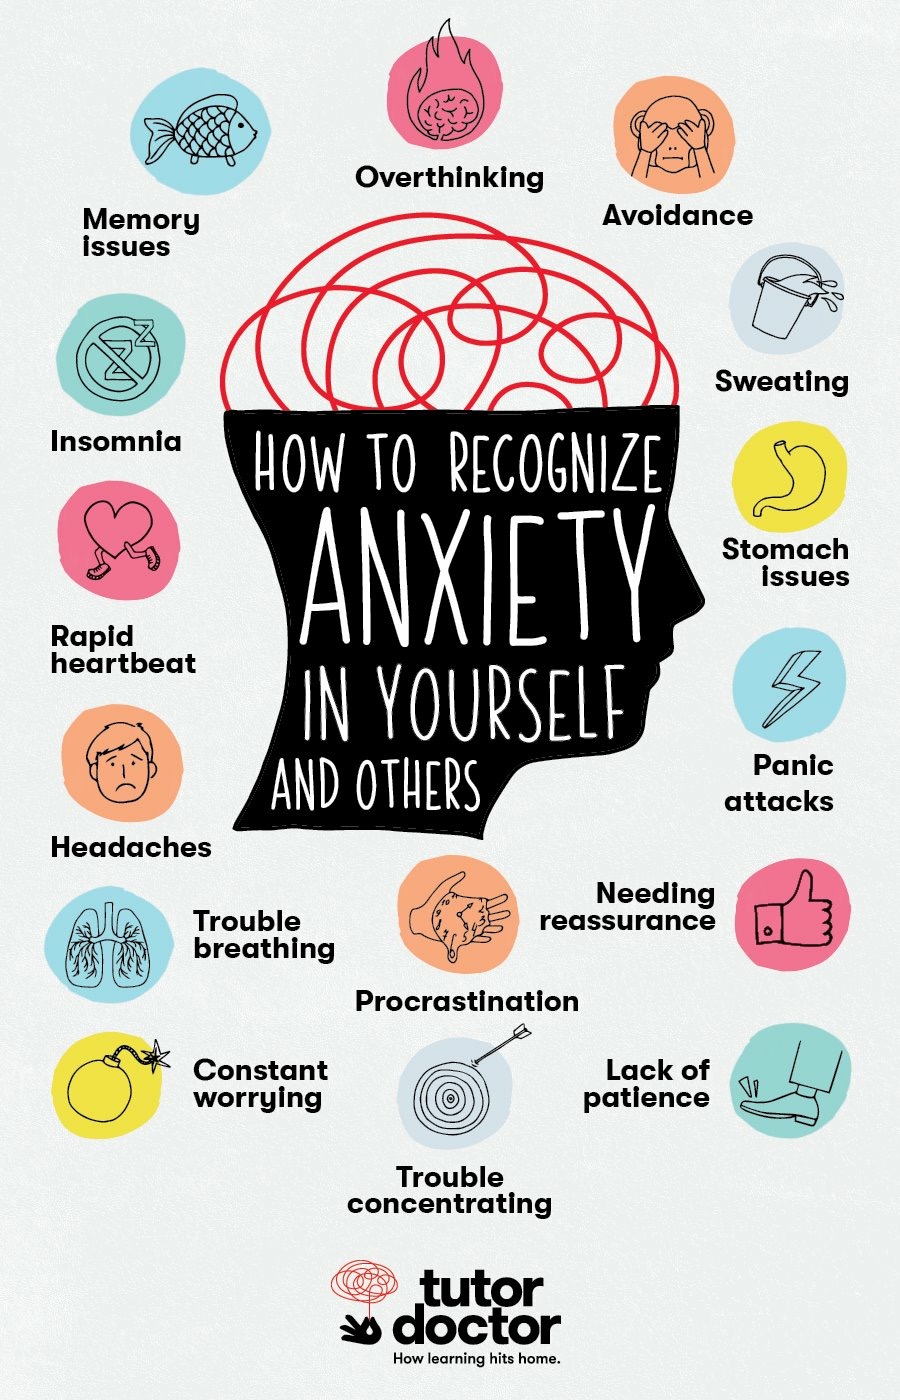 anxiety symptoms image credit The Tutor Doctor